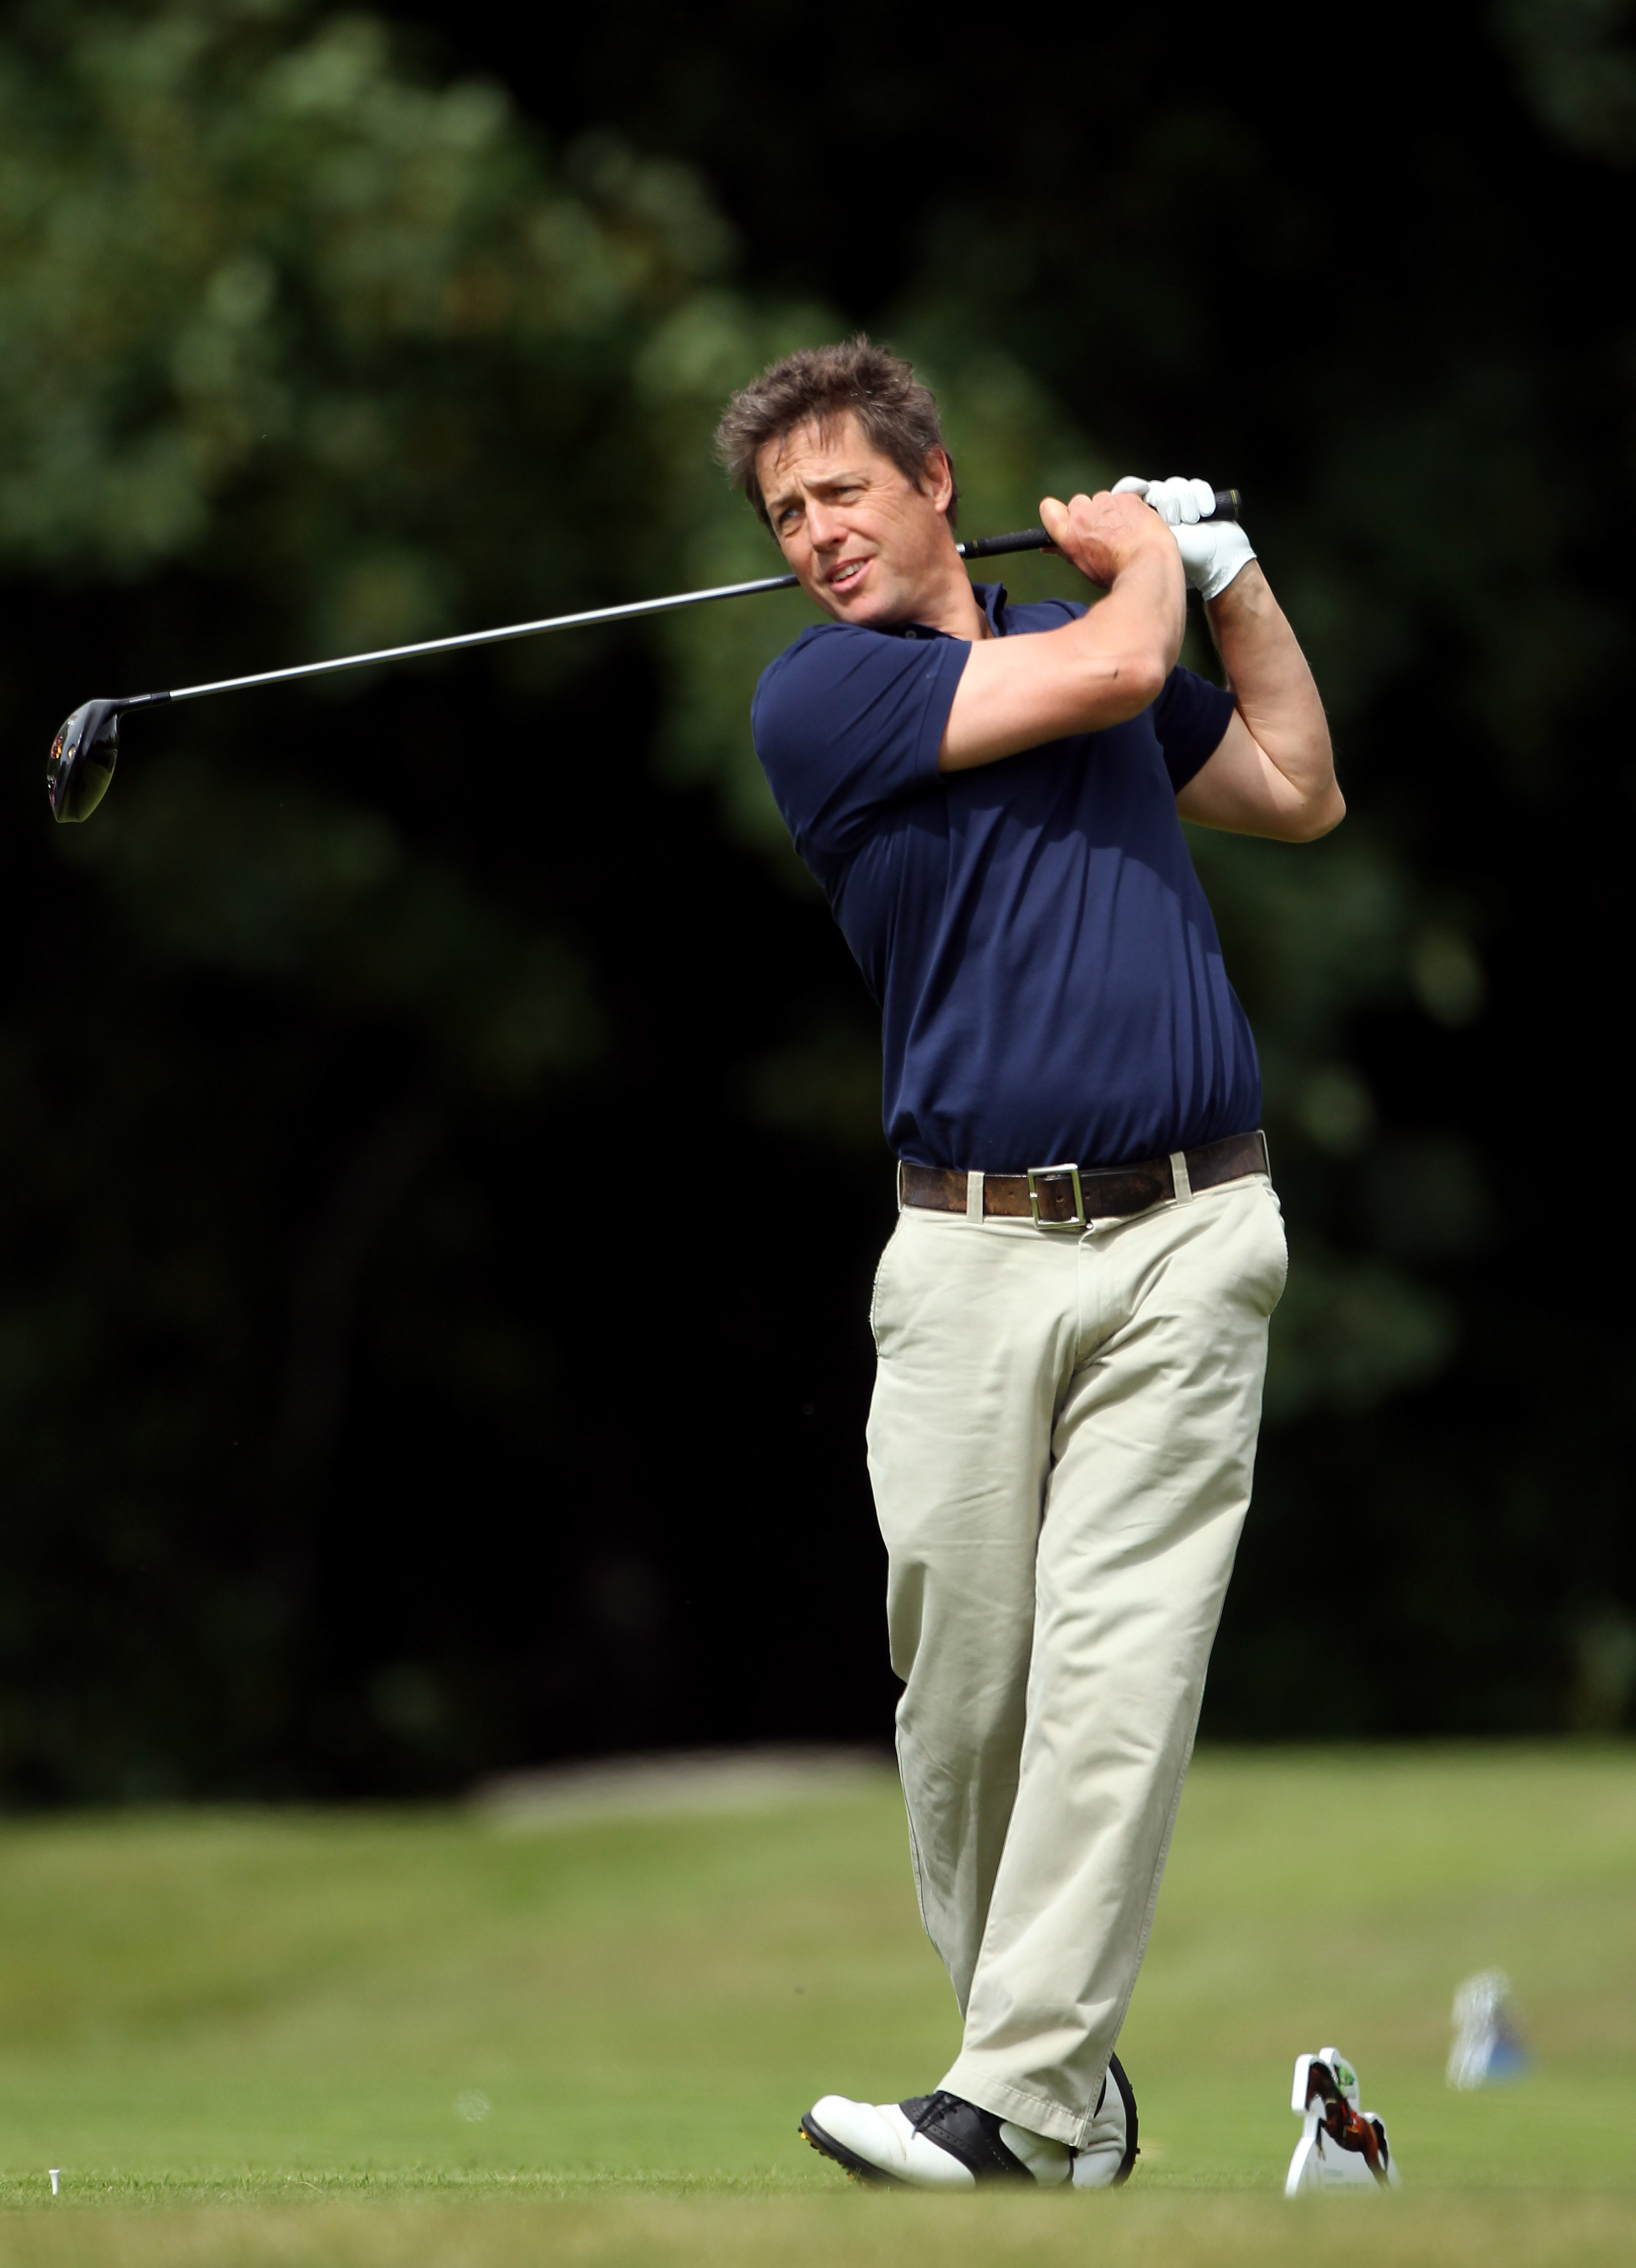 Hugh Grant in action during the second round of the JP McManus Invitational Pro-Am event at the Adare Manor Hotel and Golf Resort on July 6, 2010 in Limerick, Ireland | Source: Getty Images